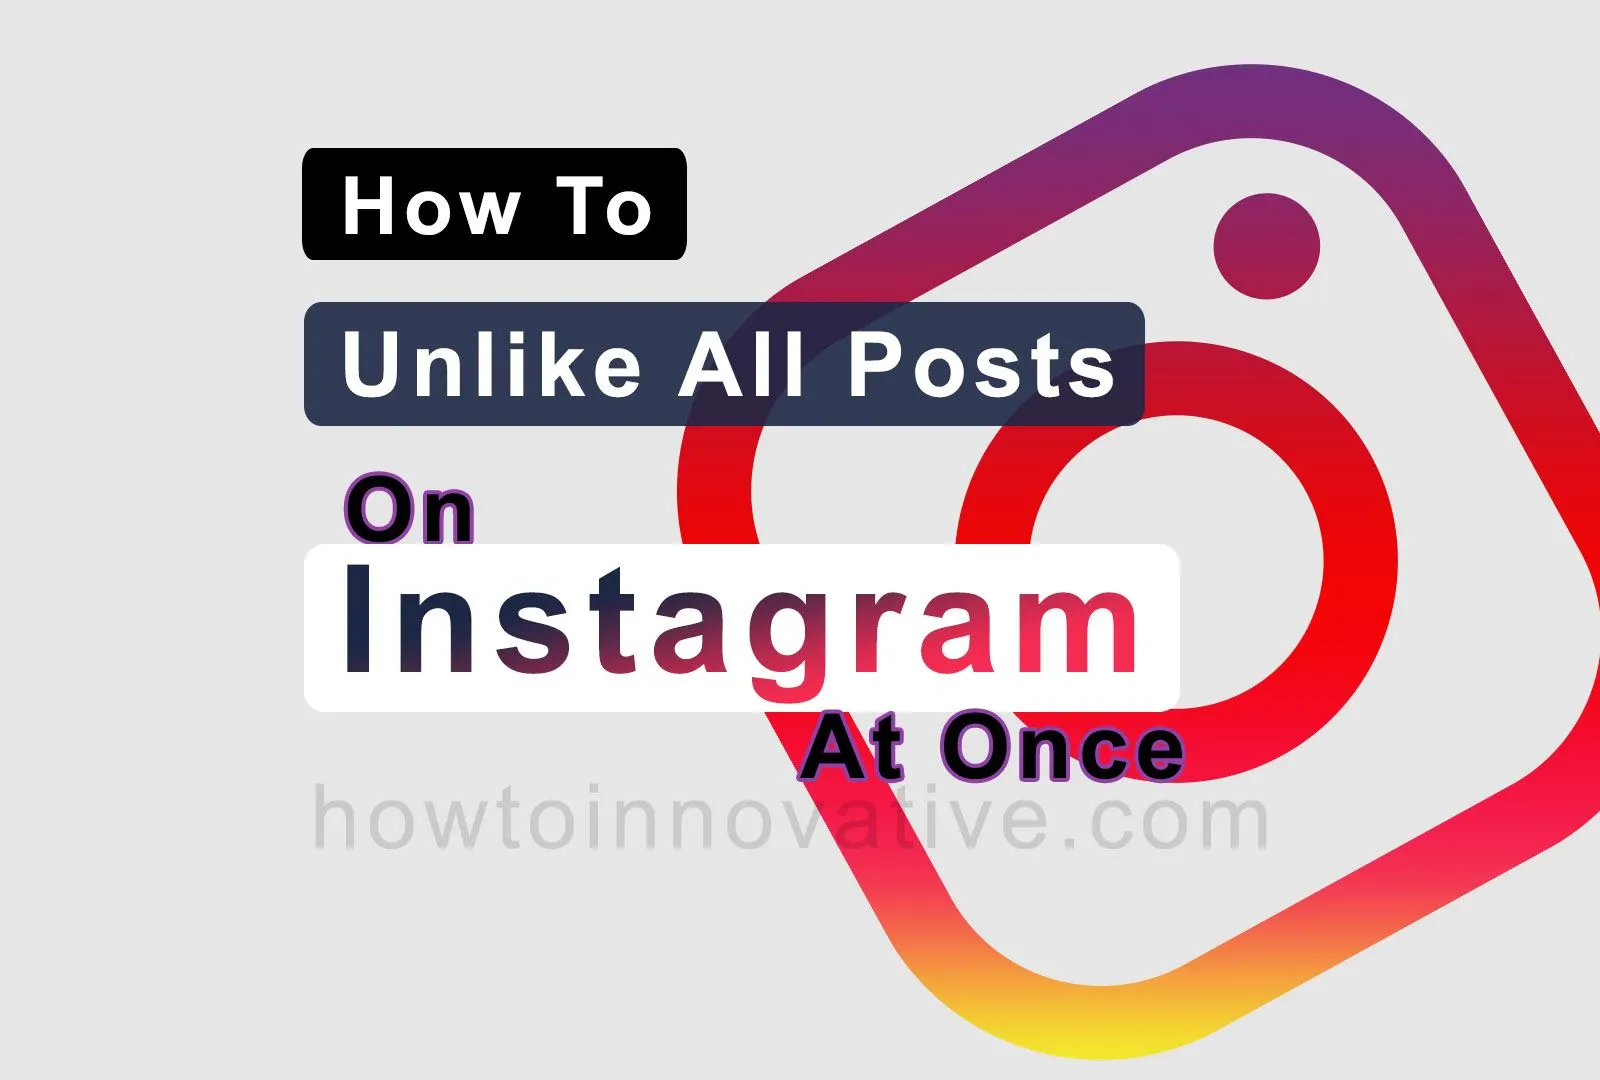 How To Unlike All Posts On Instagram At Once